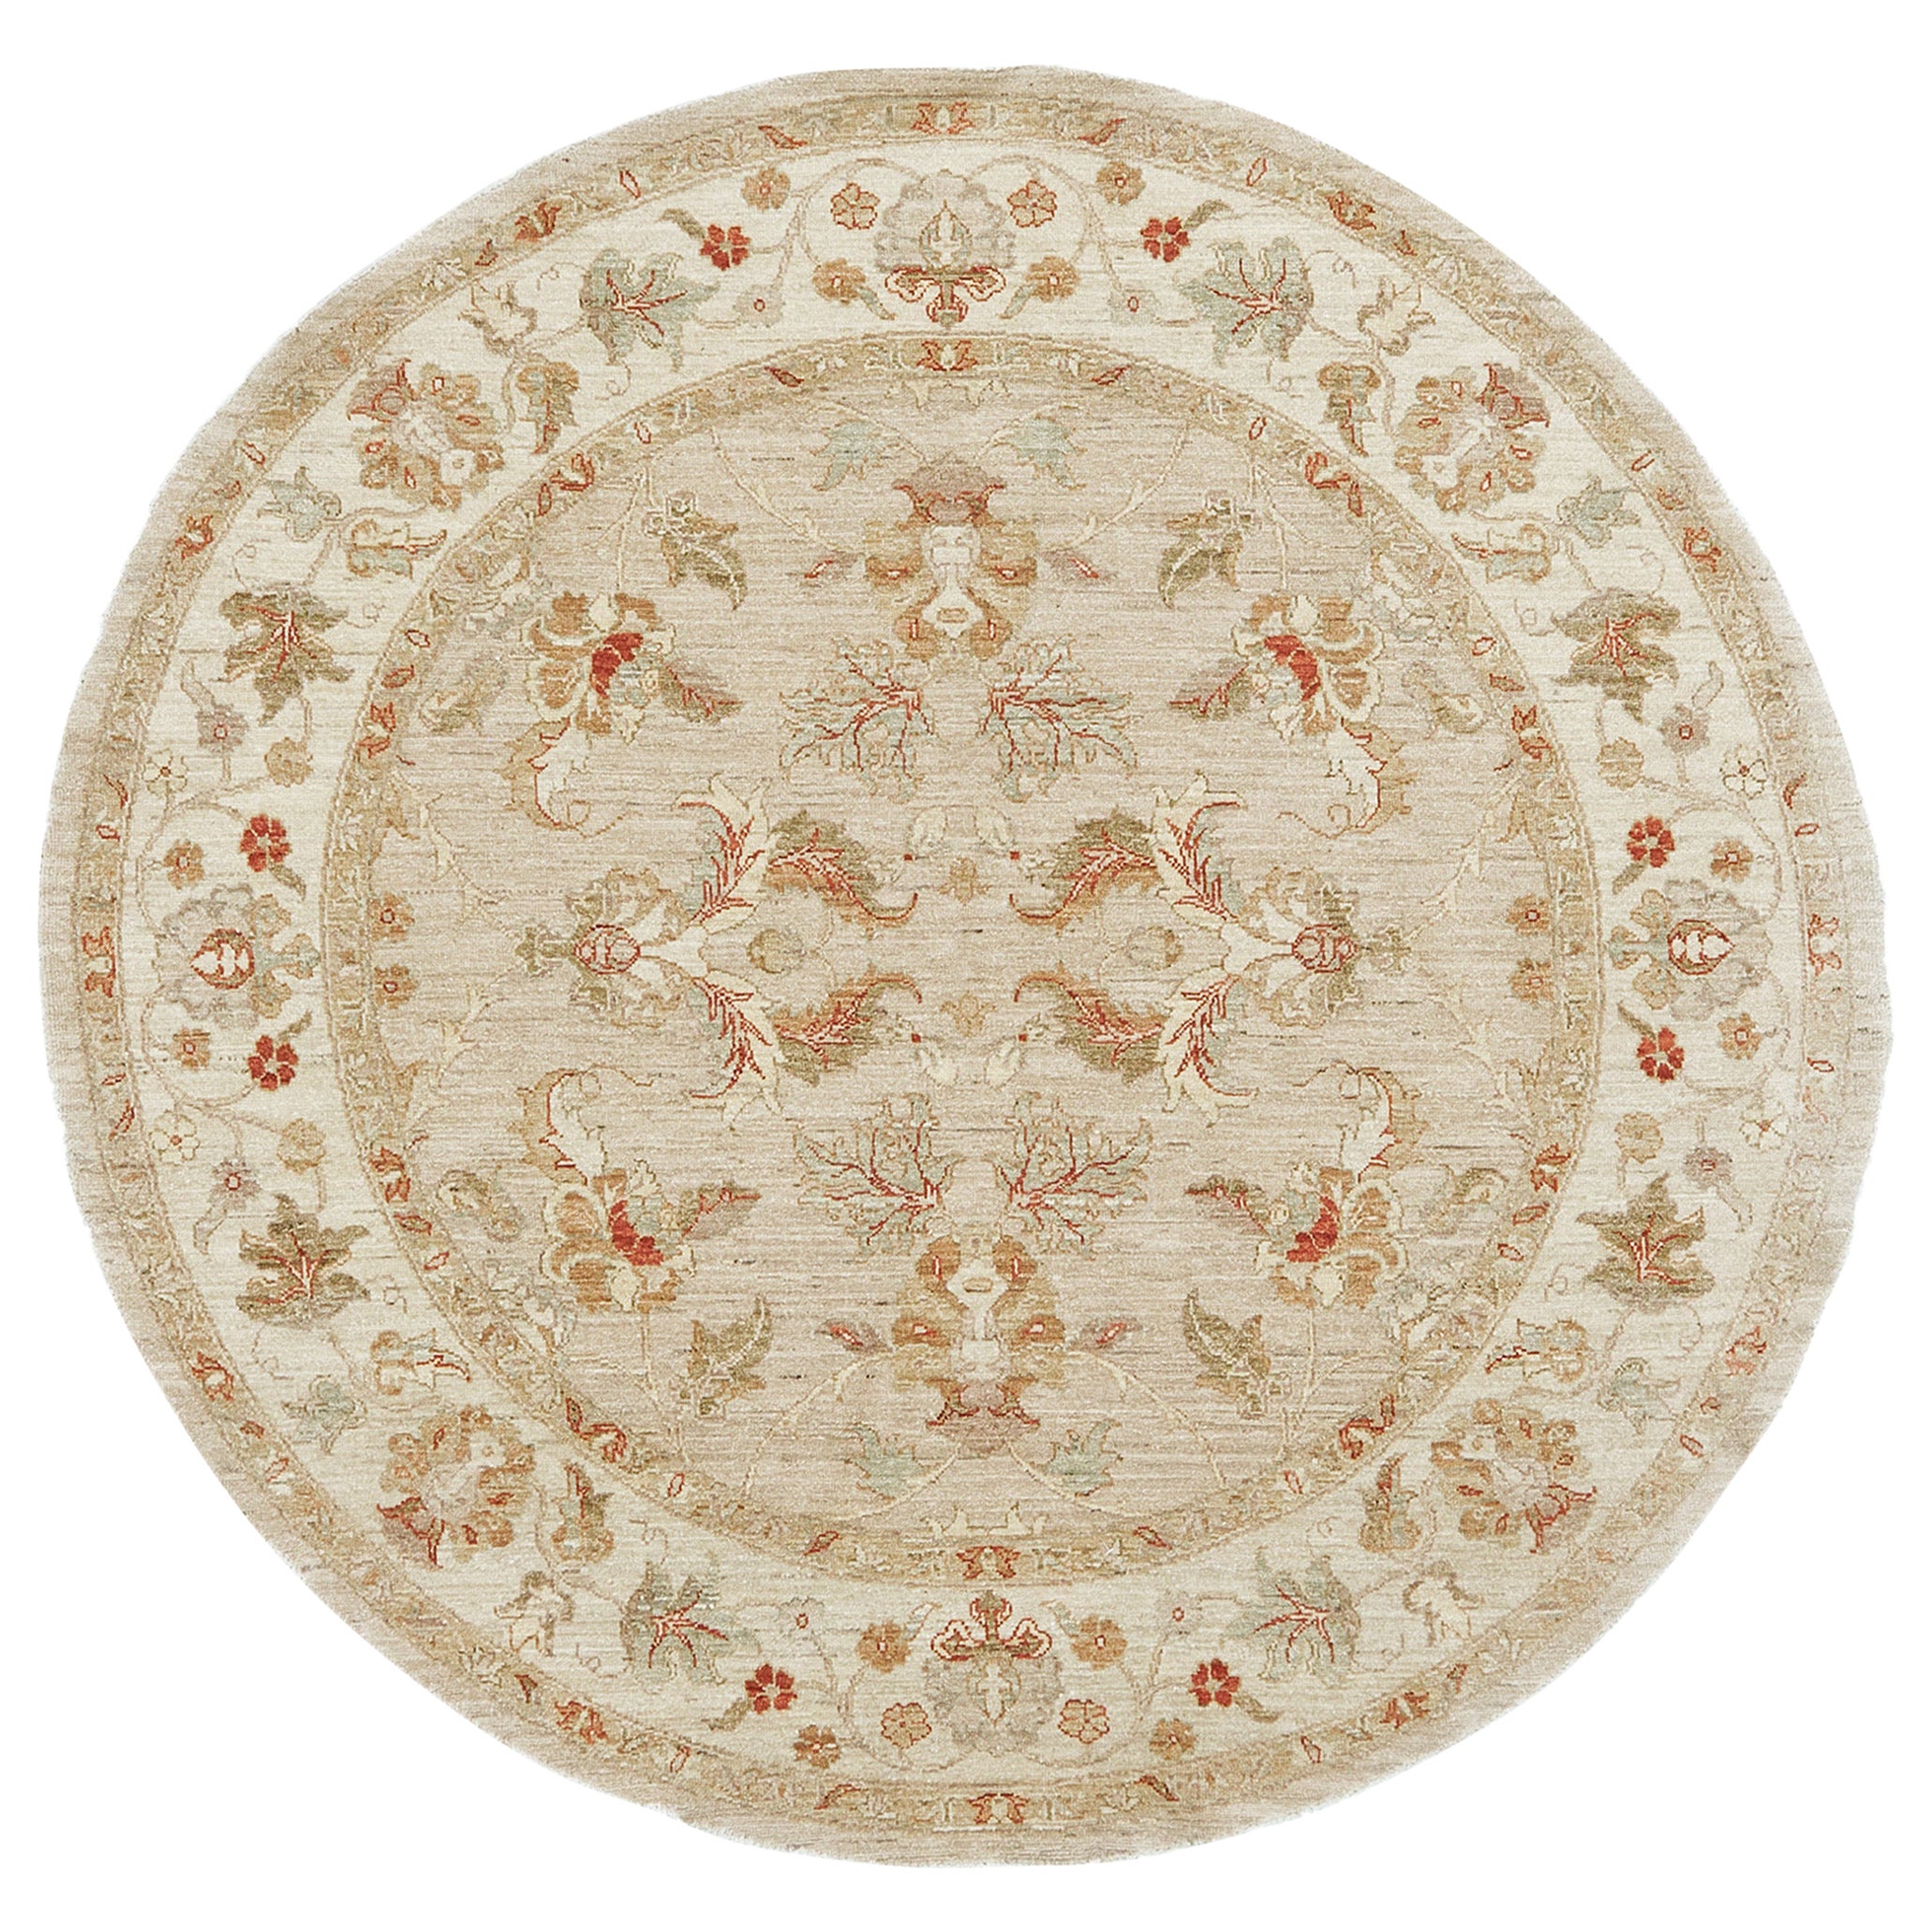 Natural Dye Agra Revival Round Rug  For Sale